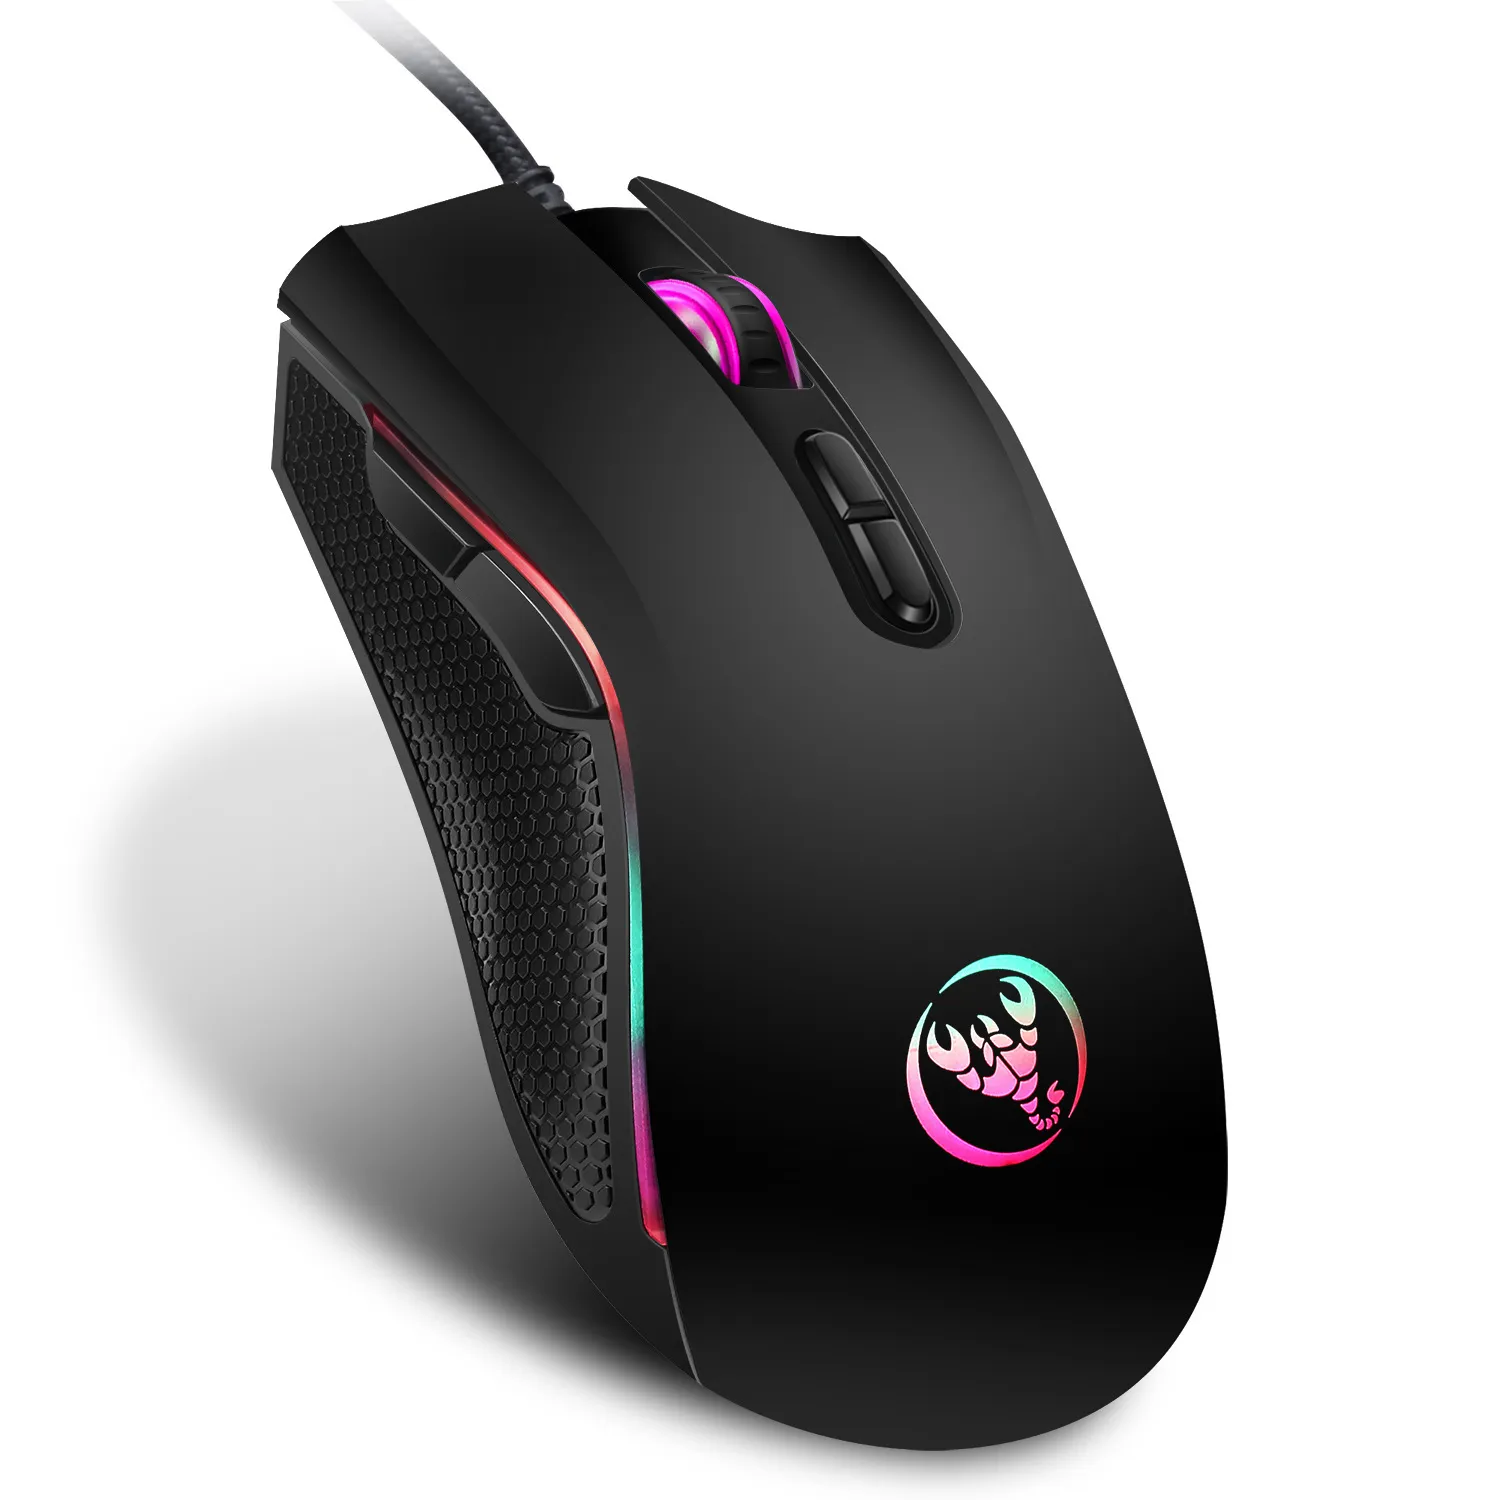 Hongsund brand High-end optical professional gaming mouse with 7 bright colors LED backlit and ergonomics design LOL CS